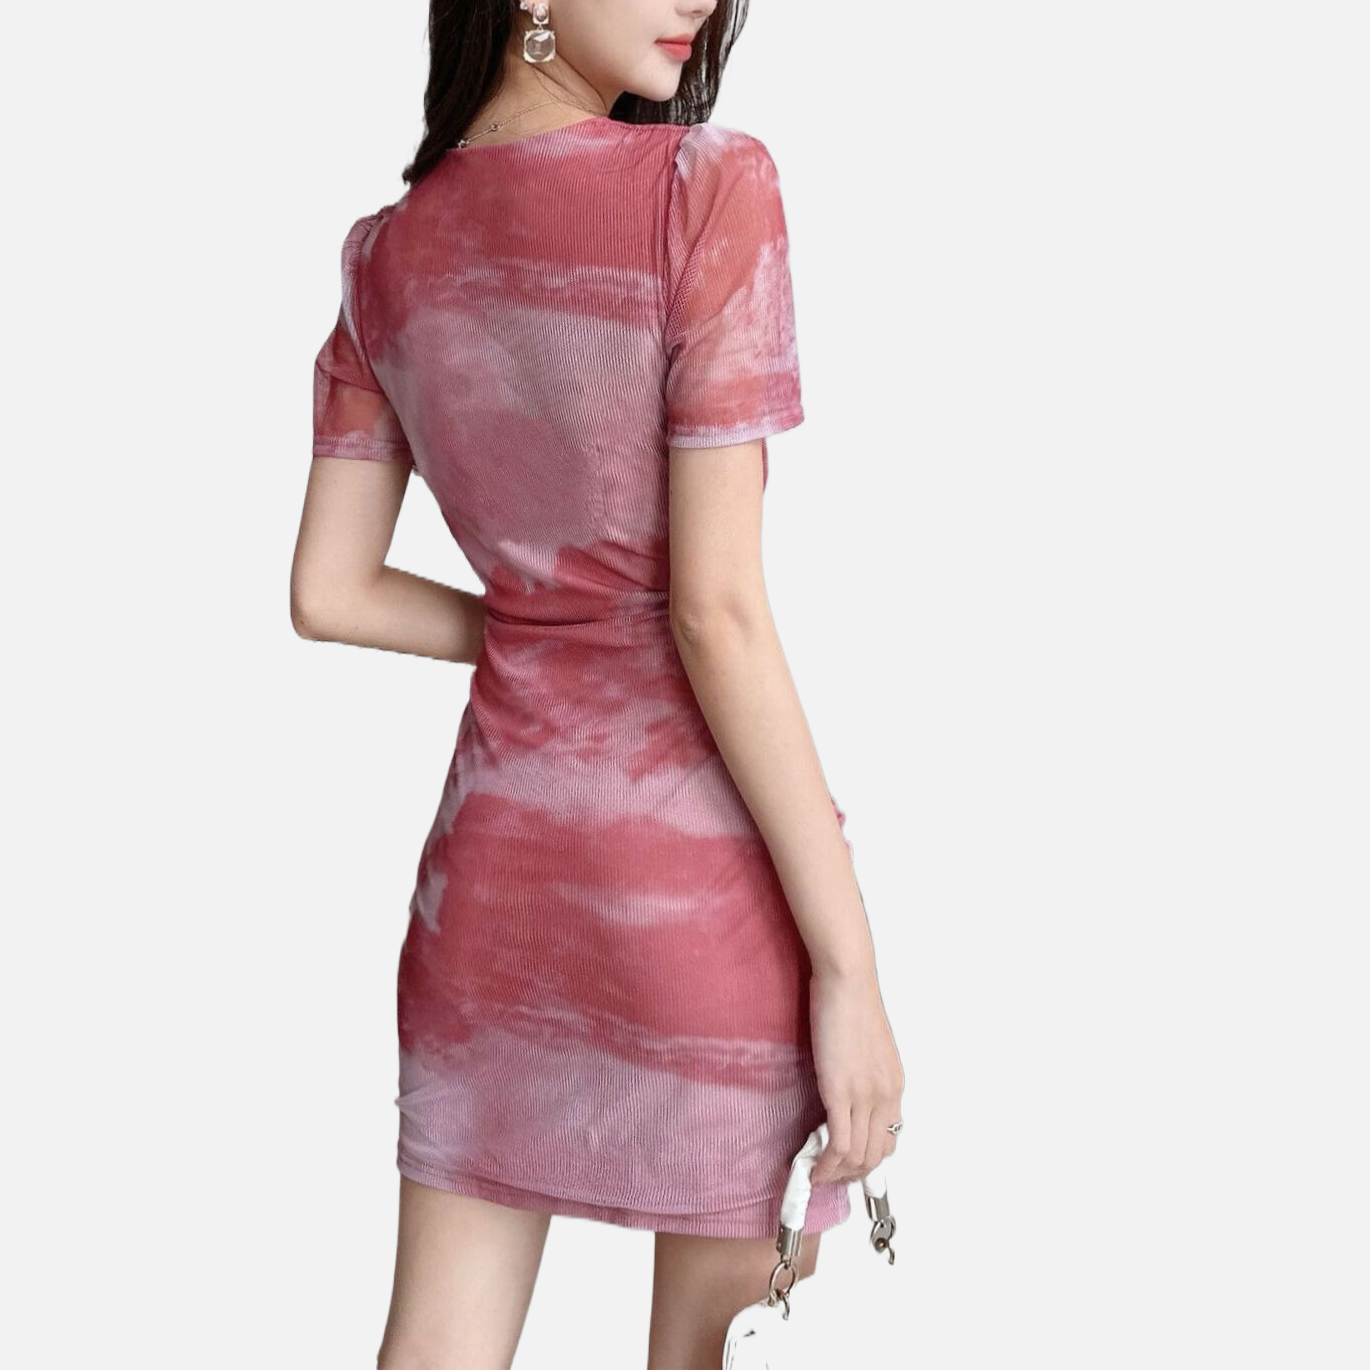 Ruched Bodycon with Floral Mesh Dress